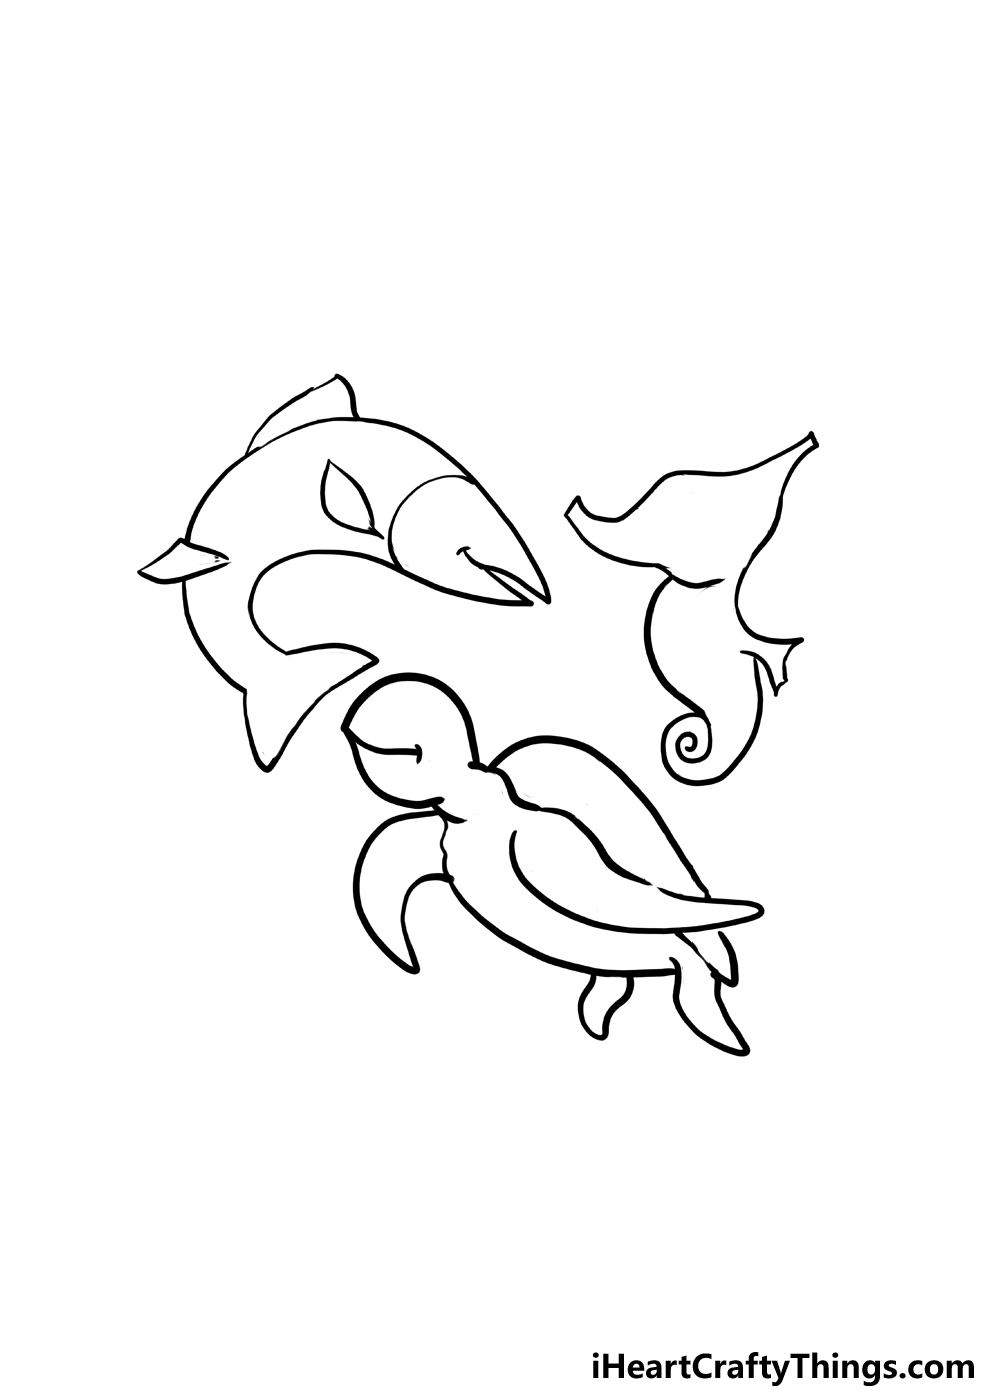 How to Draw Sea Animals step 4